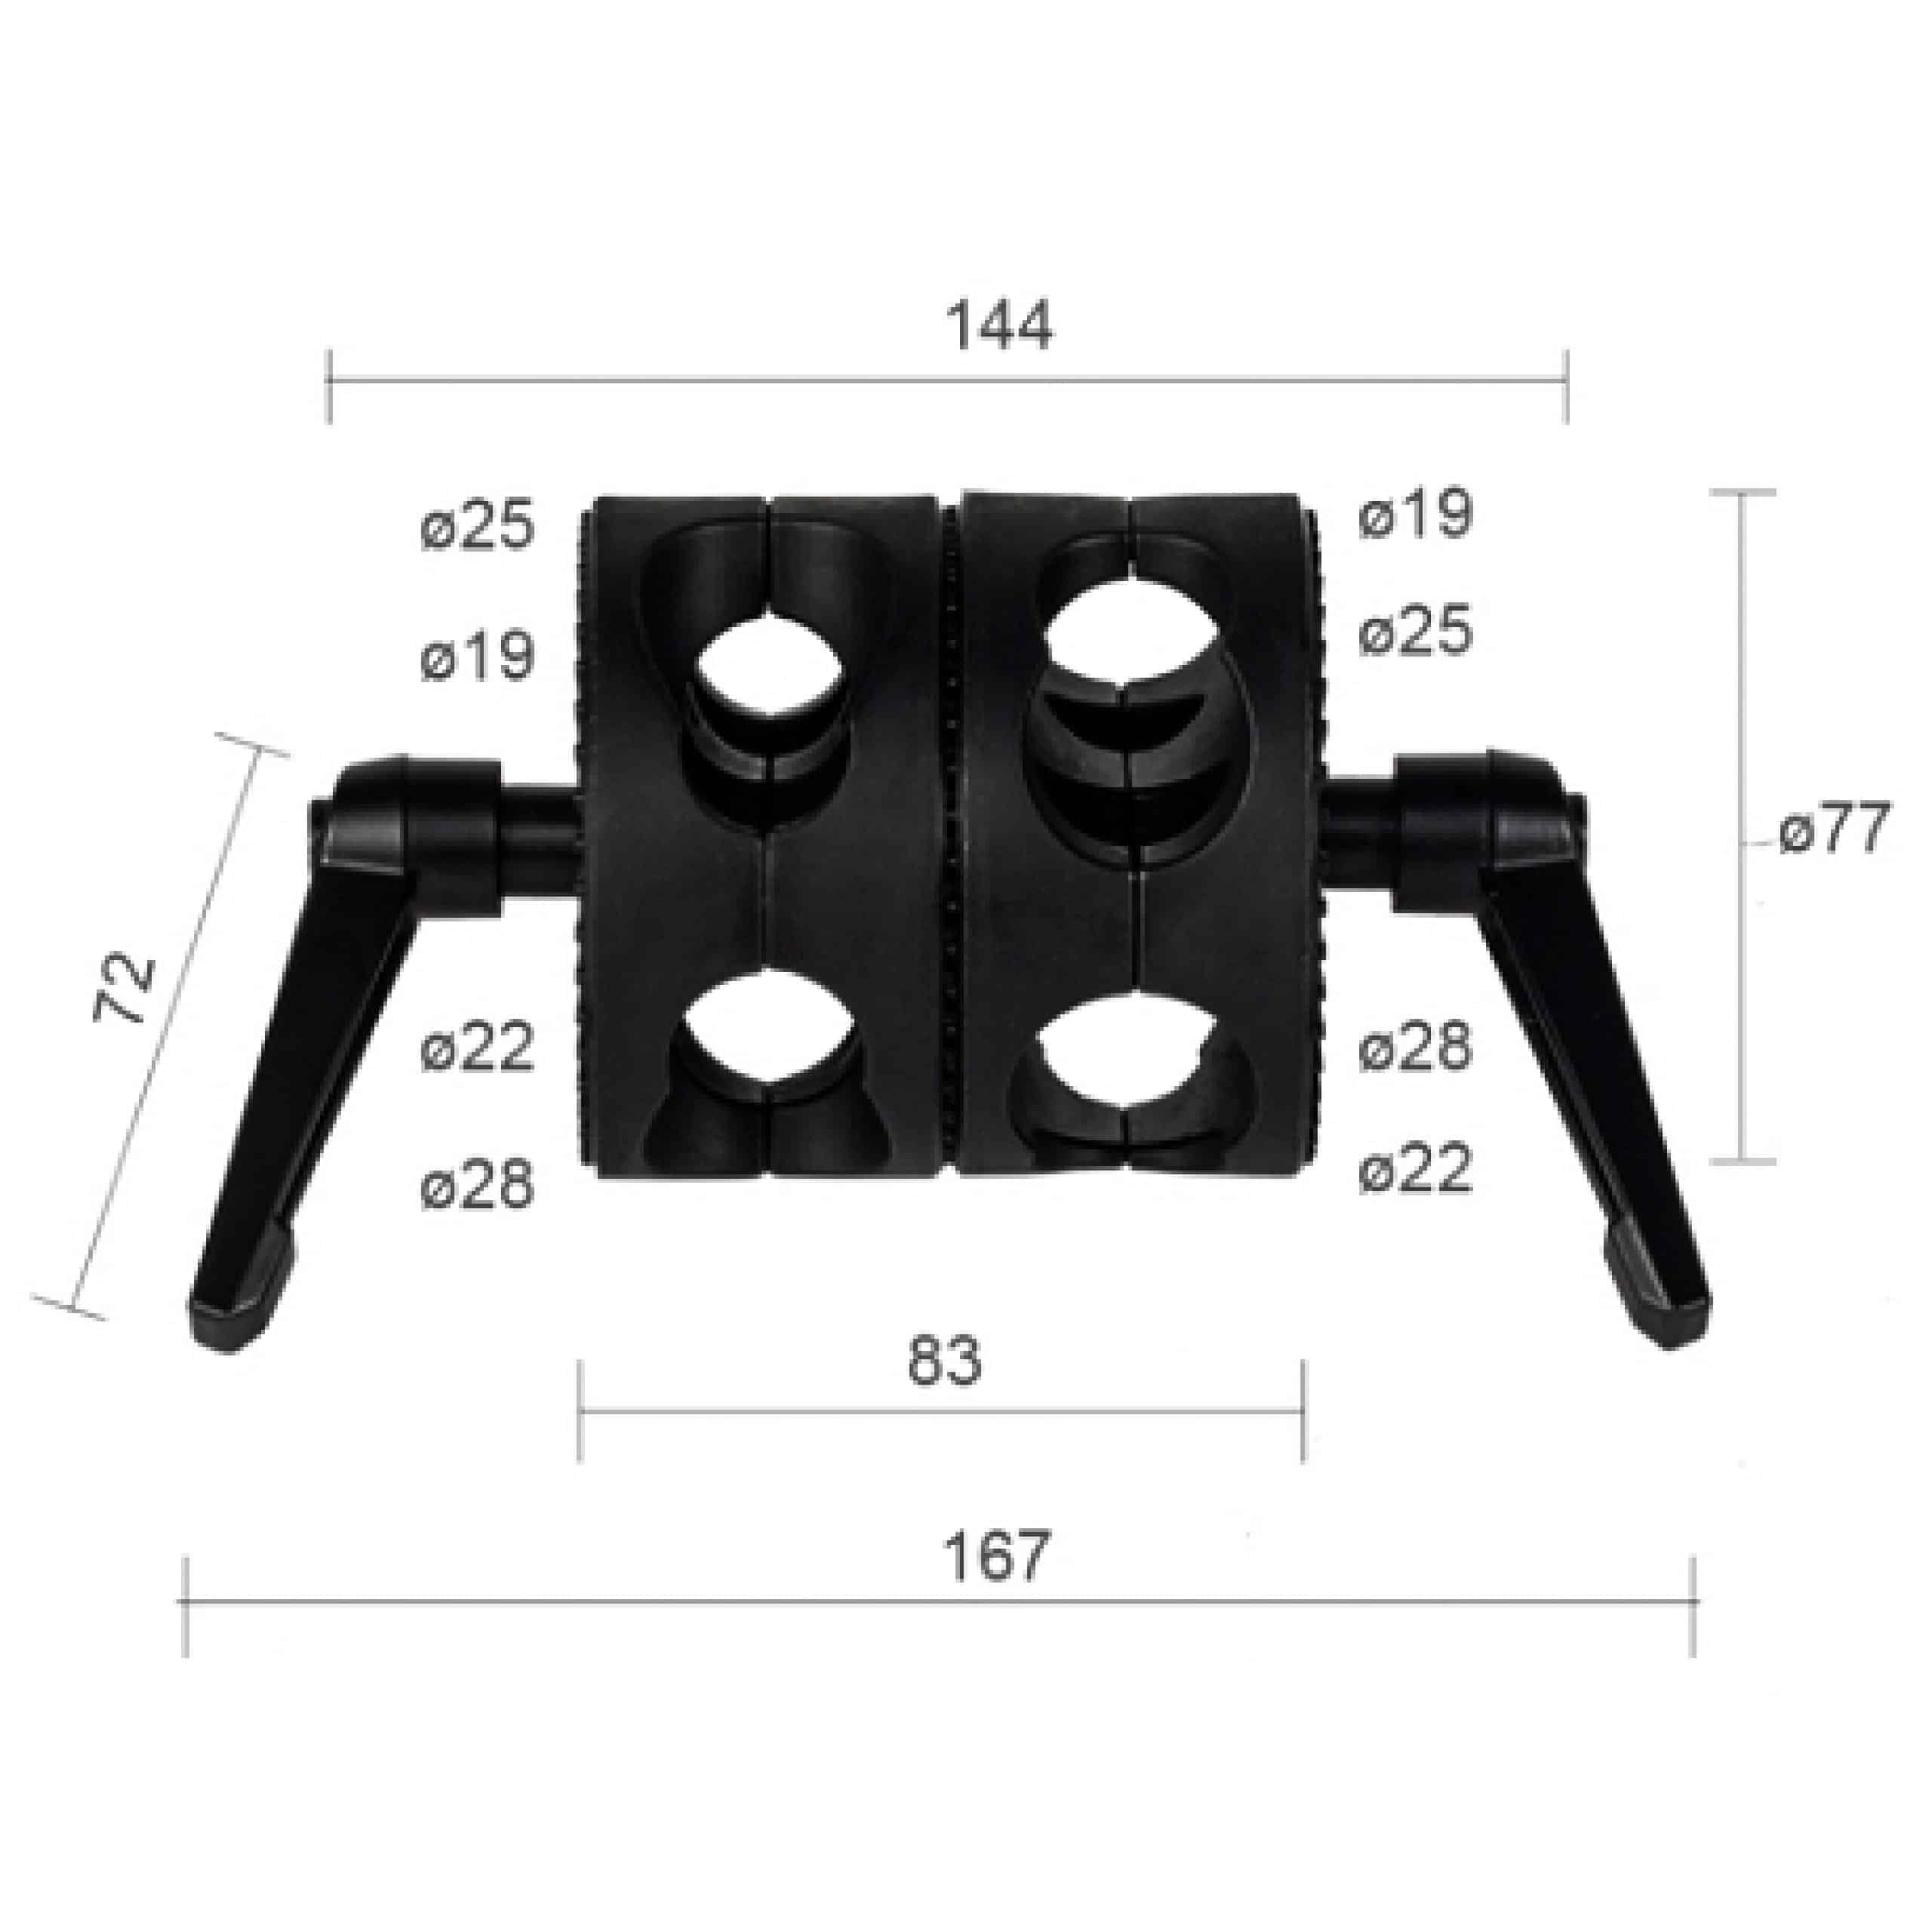 Tube Clamp suitable for 19 / 22 / 25 / 28 mm Pipes, Rods - Reflector Holder